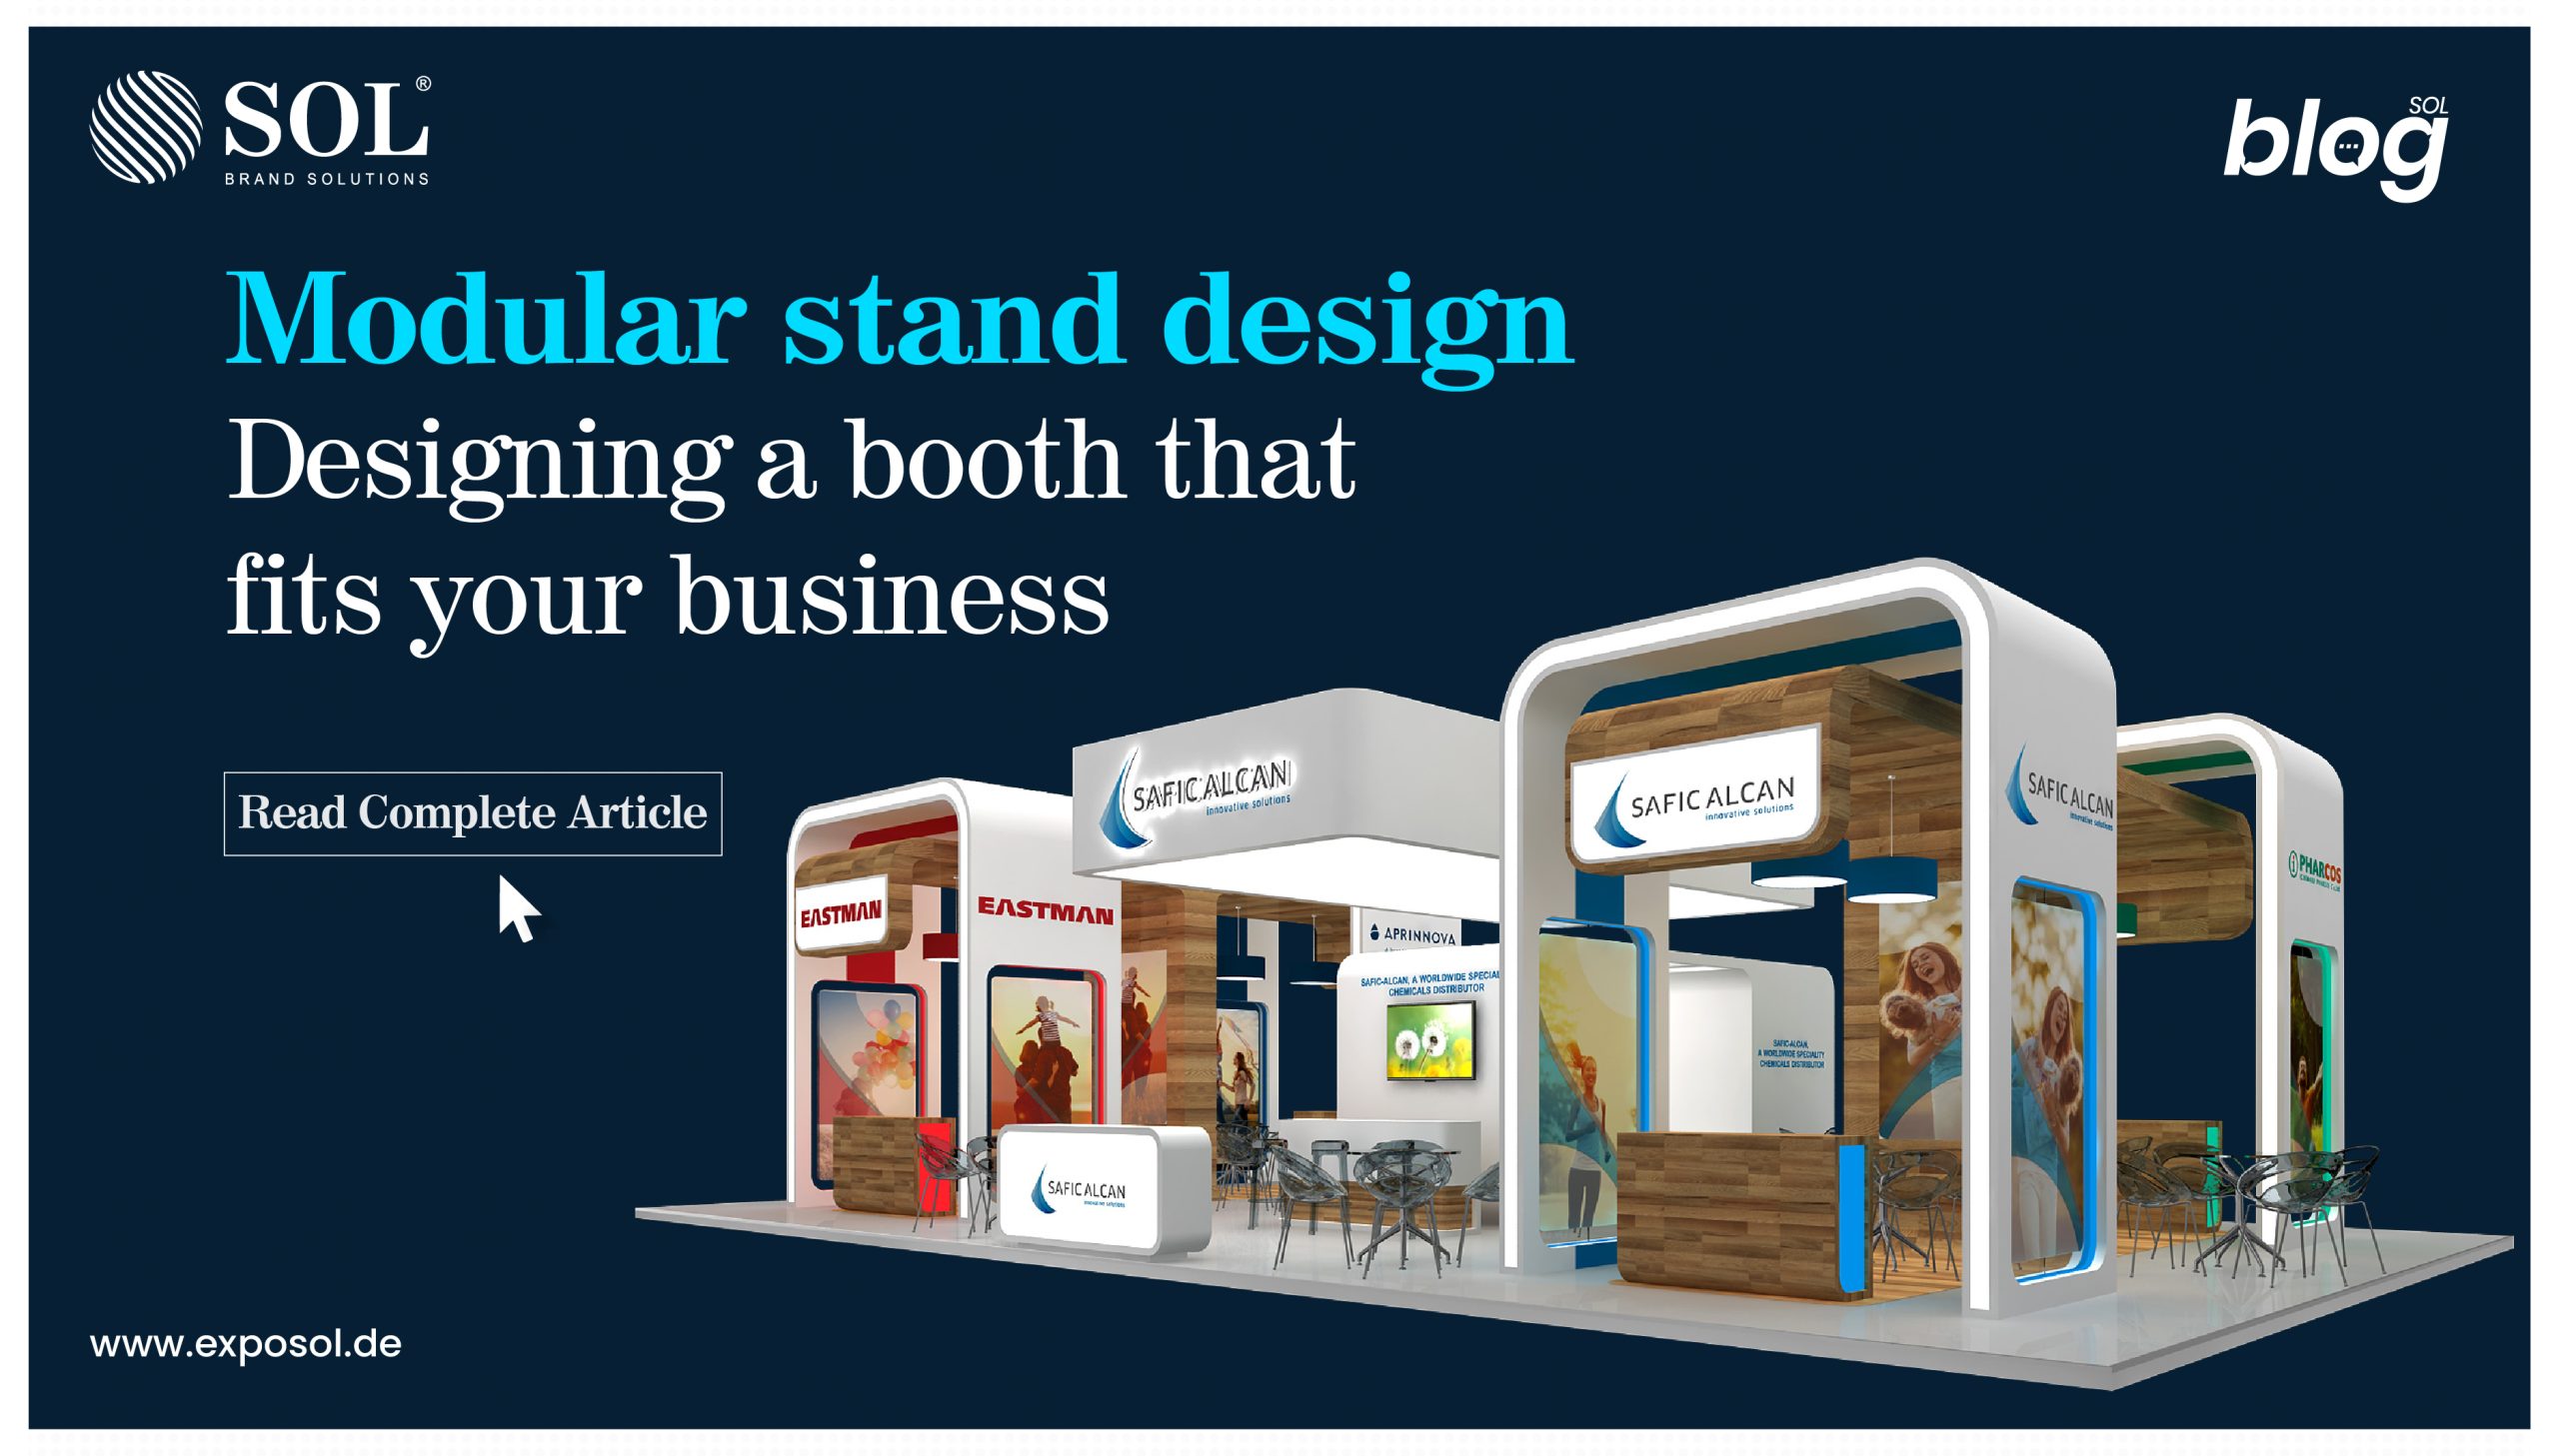 MODULAR STAND DESIGN: DESIGNING A BOOTH THAT FITS YOUR BUSINESS